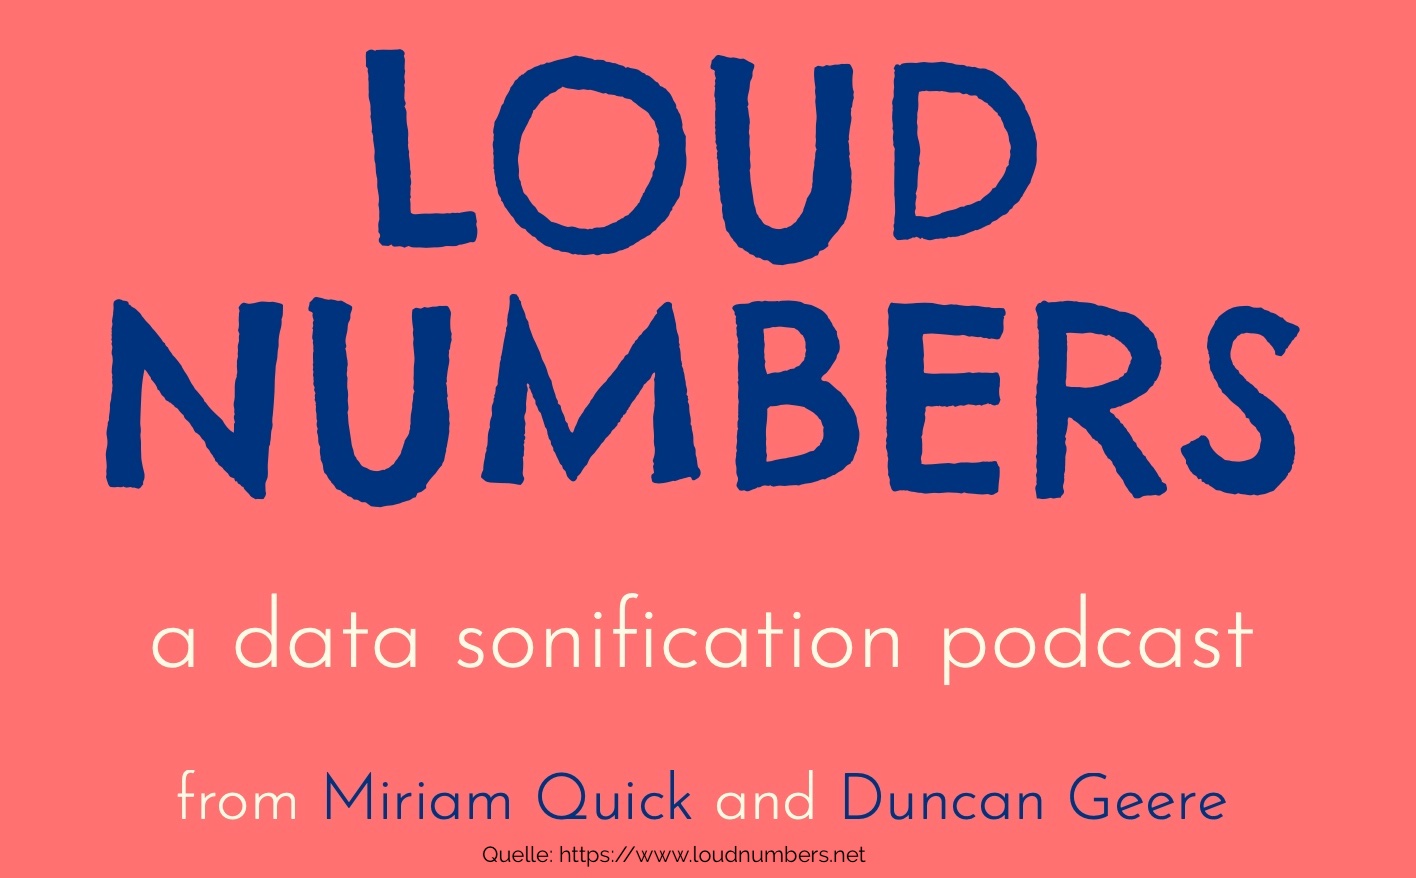 Data Sonification Podcast Loud Numbers